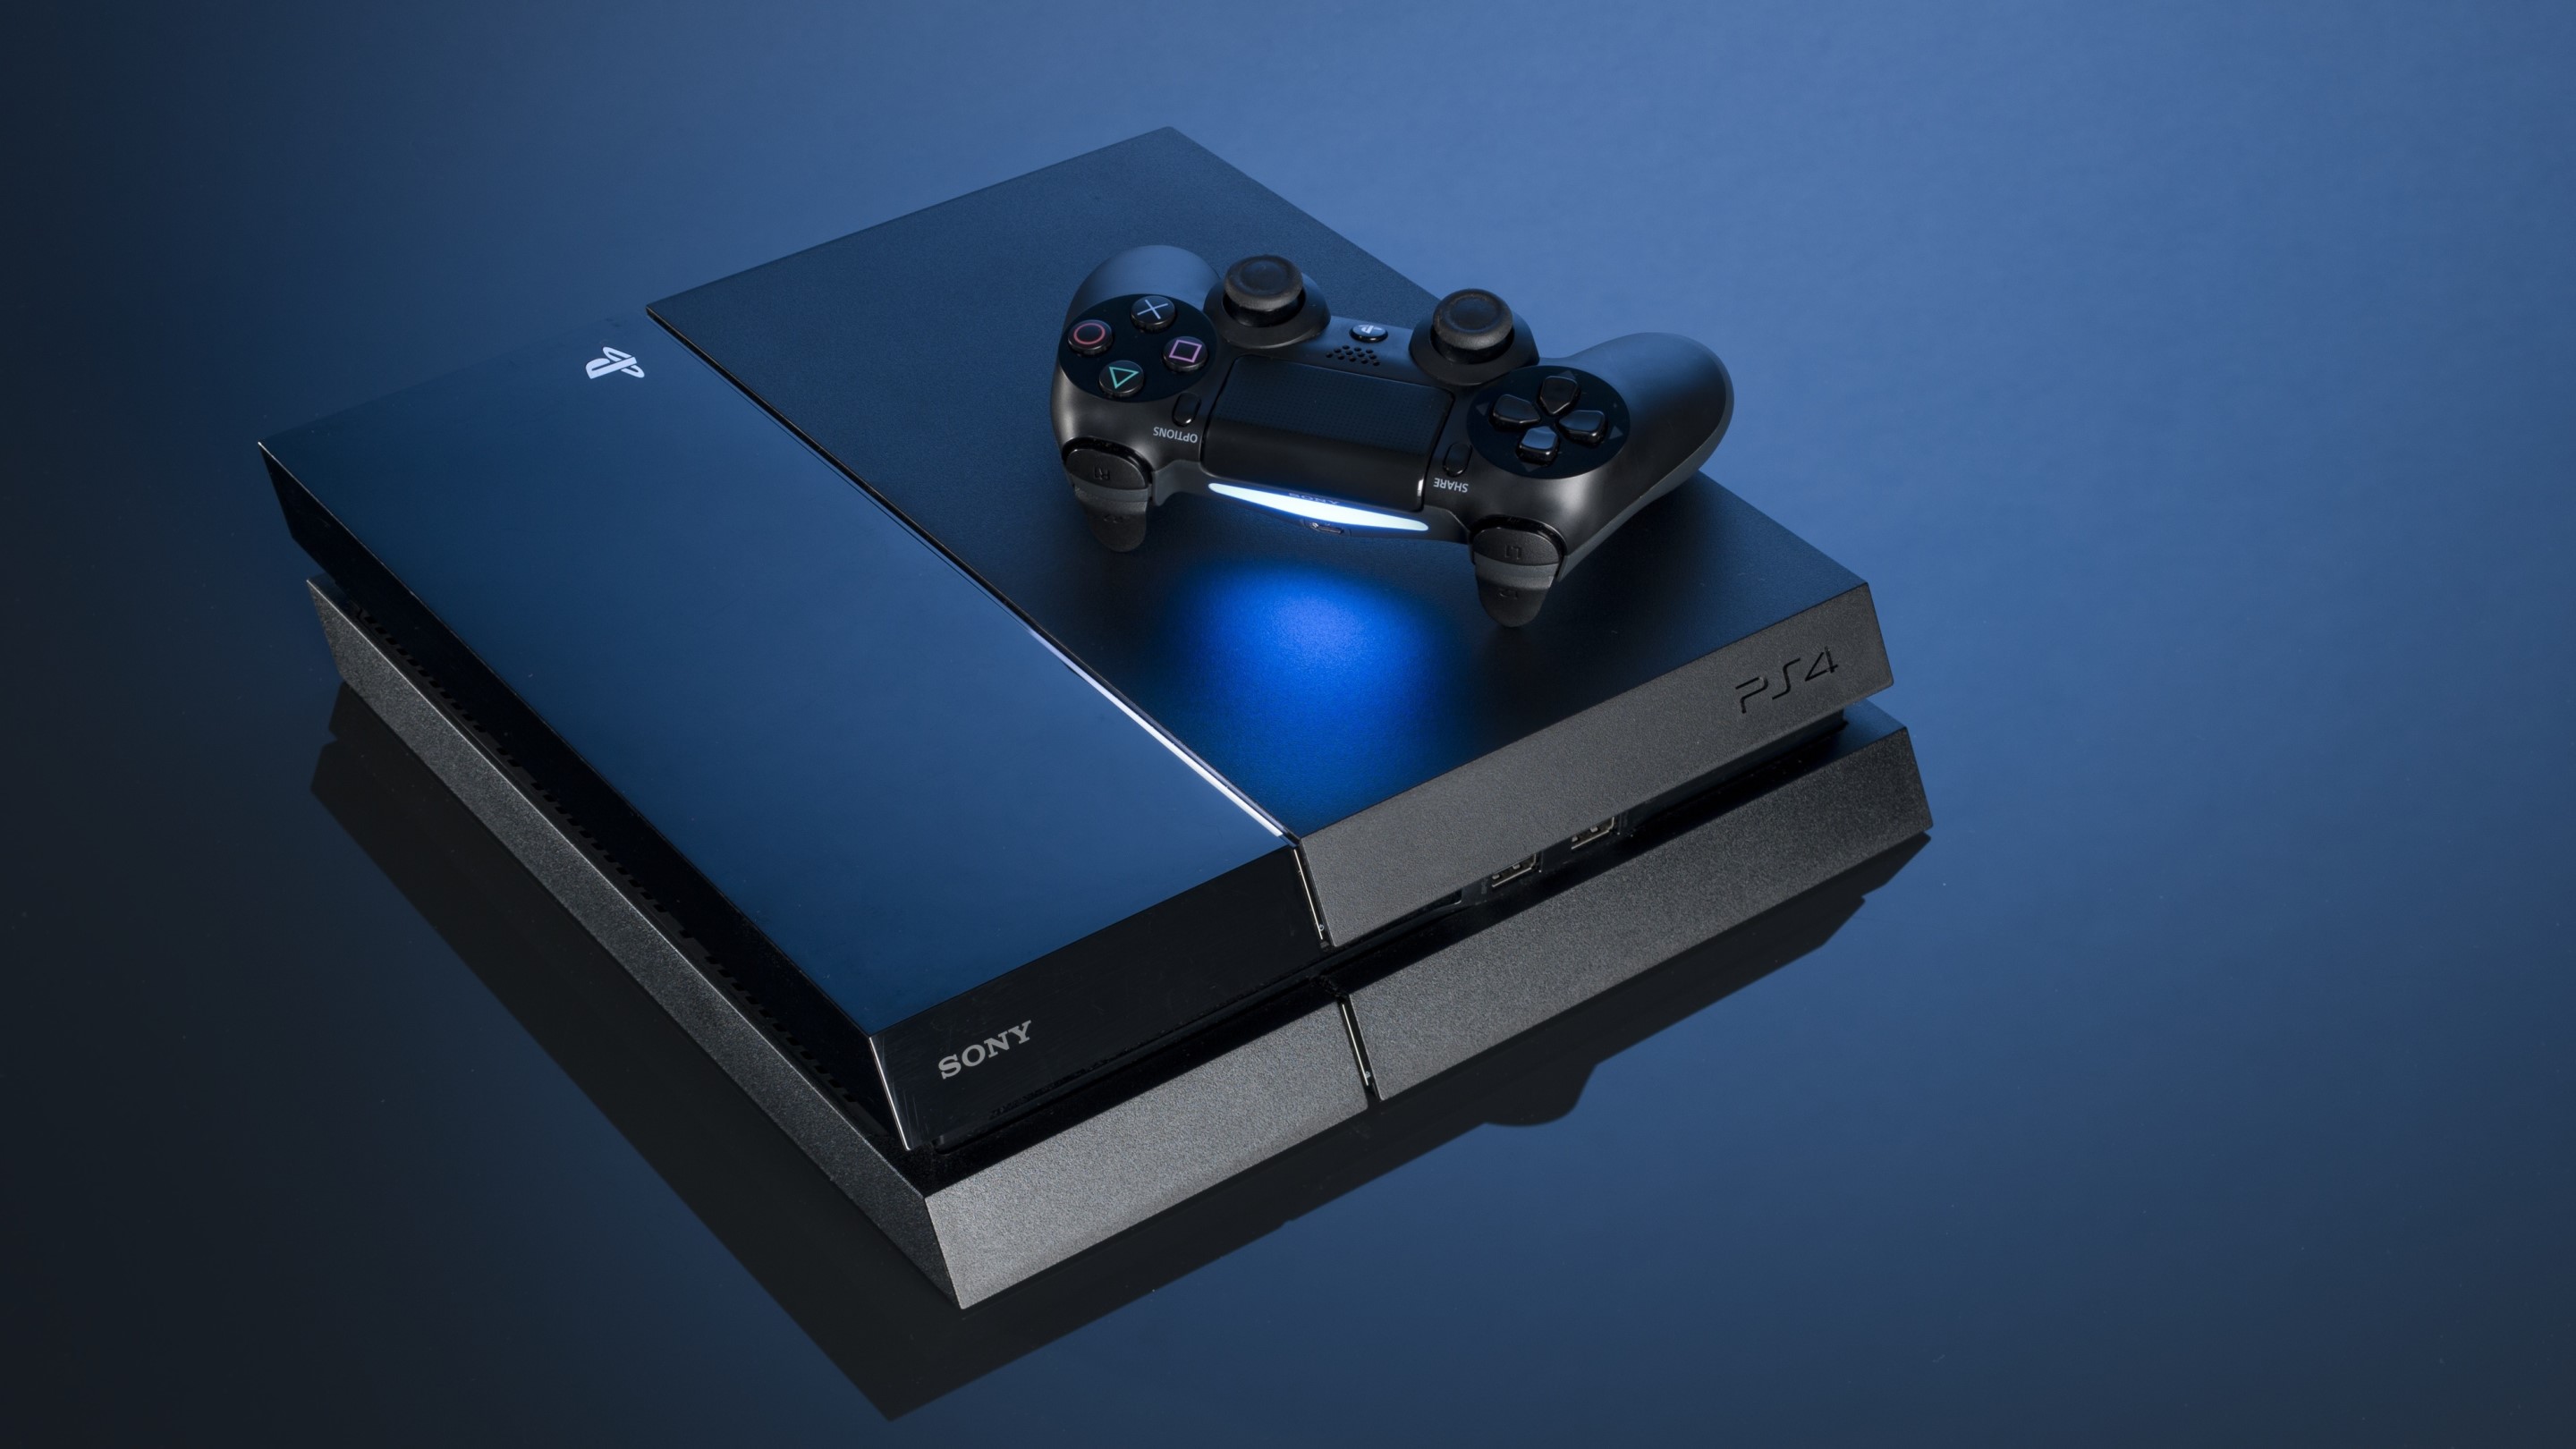 How To Put PS4 In Safe Mode, Or Get Out Of It If You're